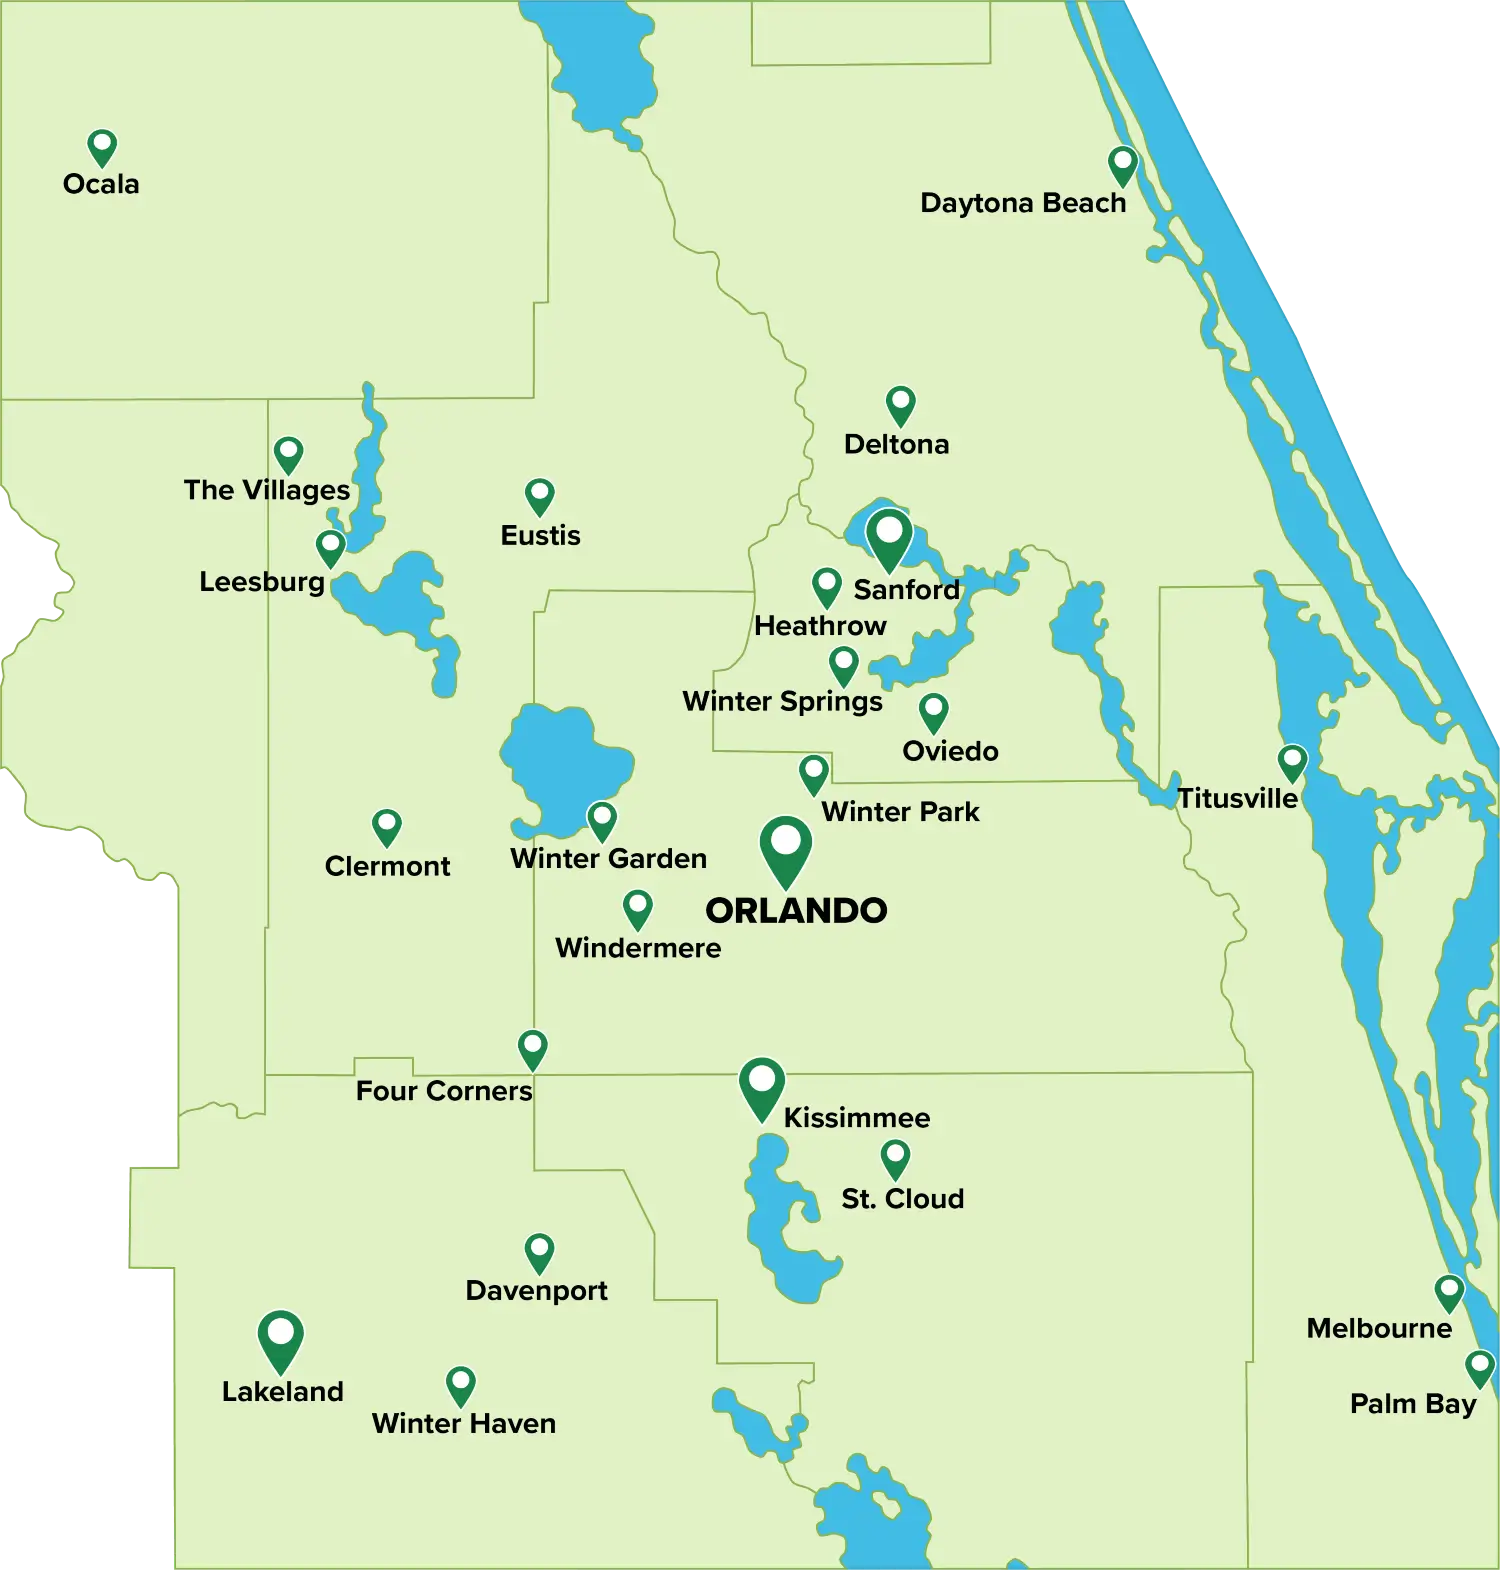 Sorko Services service area map - Local Pest Control and Pond Management in the Greater Orlando area - Sanford | Orlando | Winter Park | Oviedo | Heathrow | Kissimmee | Winter Springs | Clermont | Winter Garden | Windermere | Davenport | Winter Haven | Ocala | Lakeland | Daytona Beach | Deltona | St Cloud | Four Corners | The Villages | Leesburg | Eustis | Titusville | Melbourne | Palm Bay